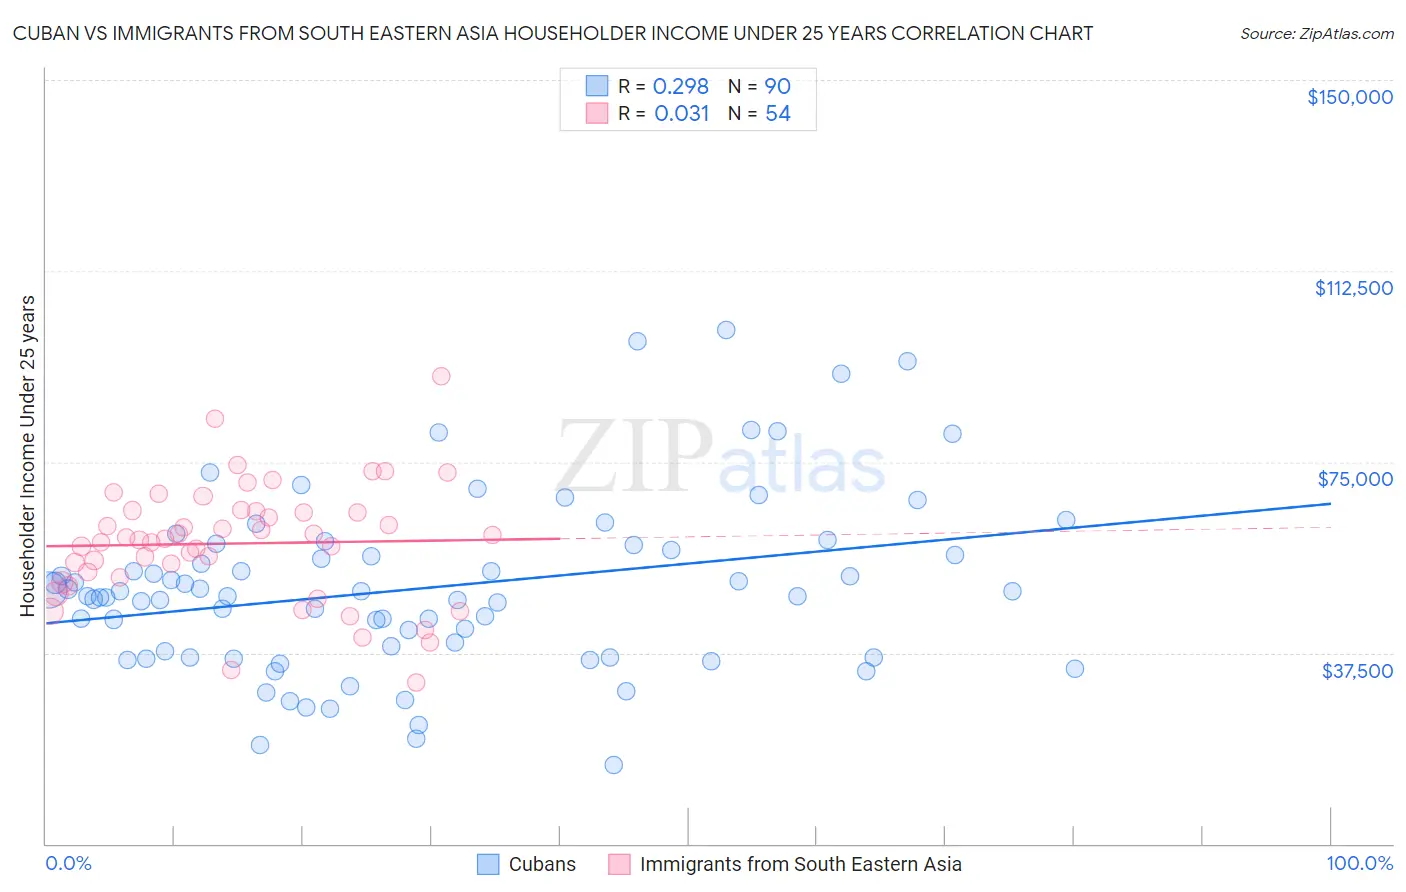 Cuban vs Immigrants from South Eastern Asia Householder Income Under 25 years